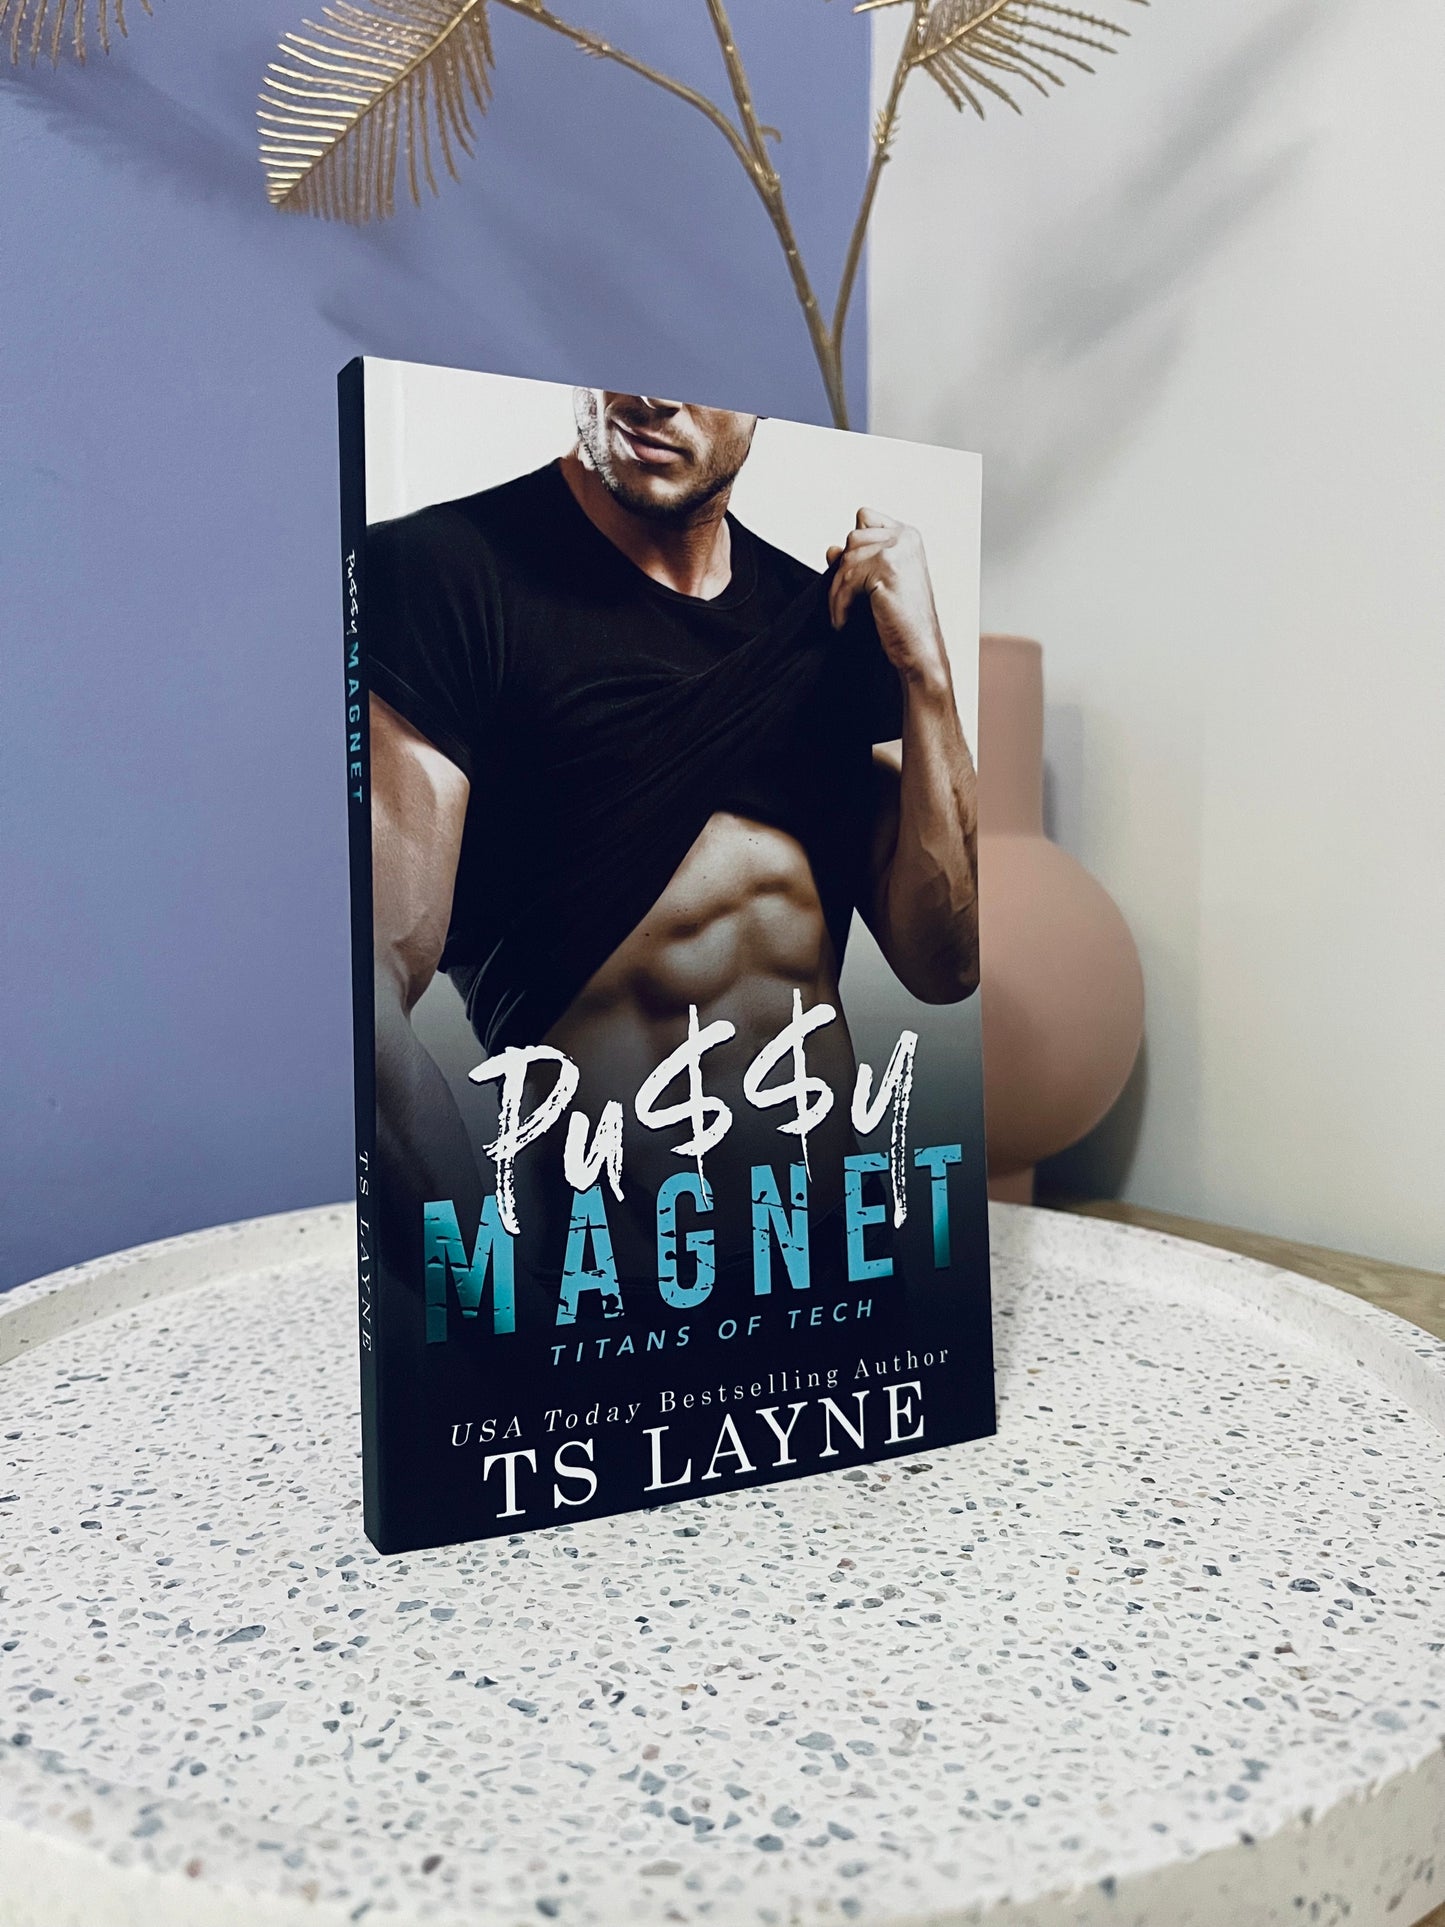 Pu$$y Magnet by TS Layne (Titans of Tech Book 1)